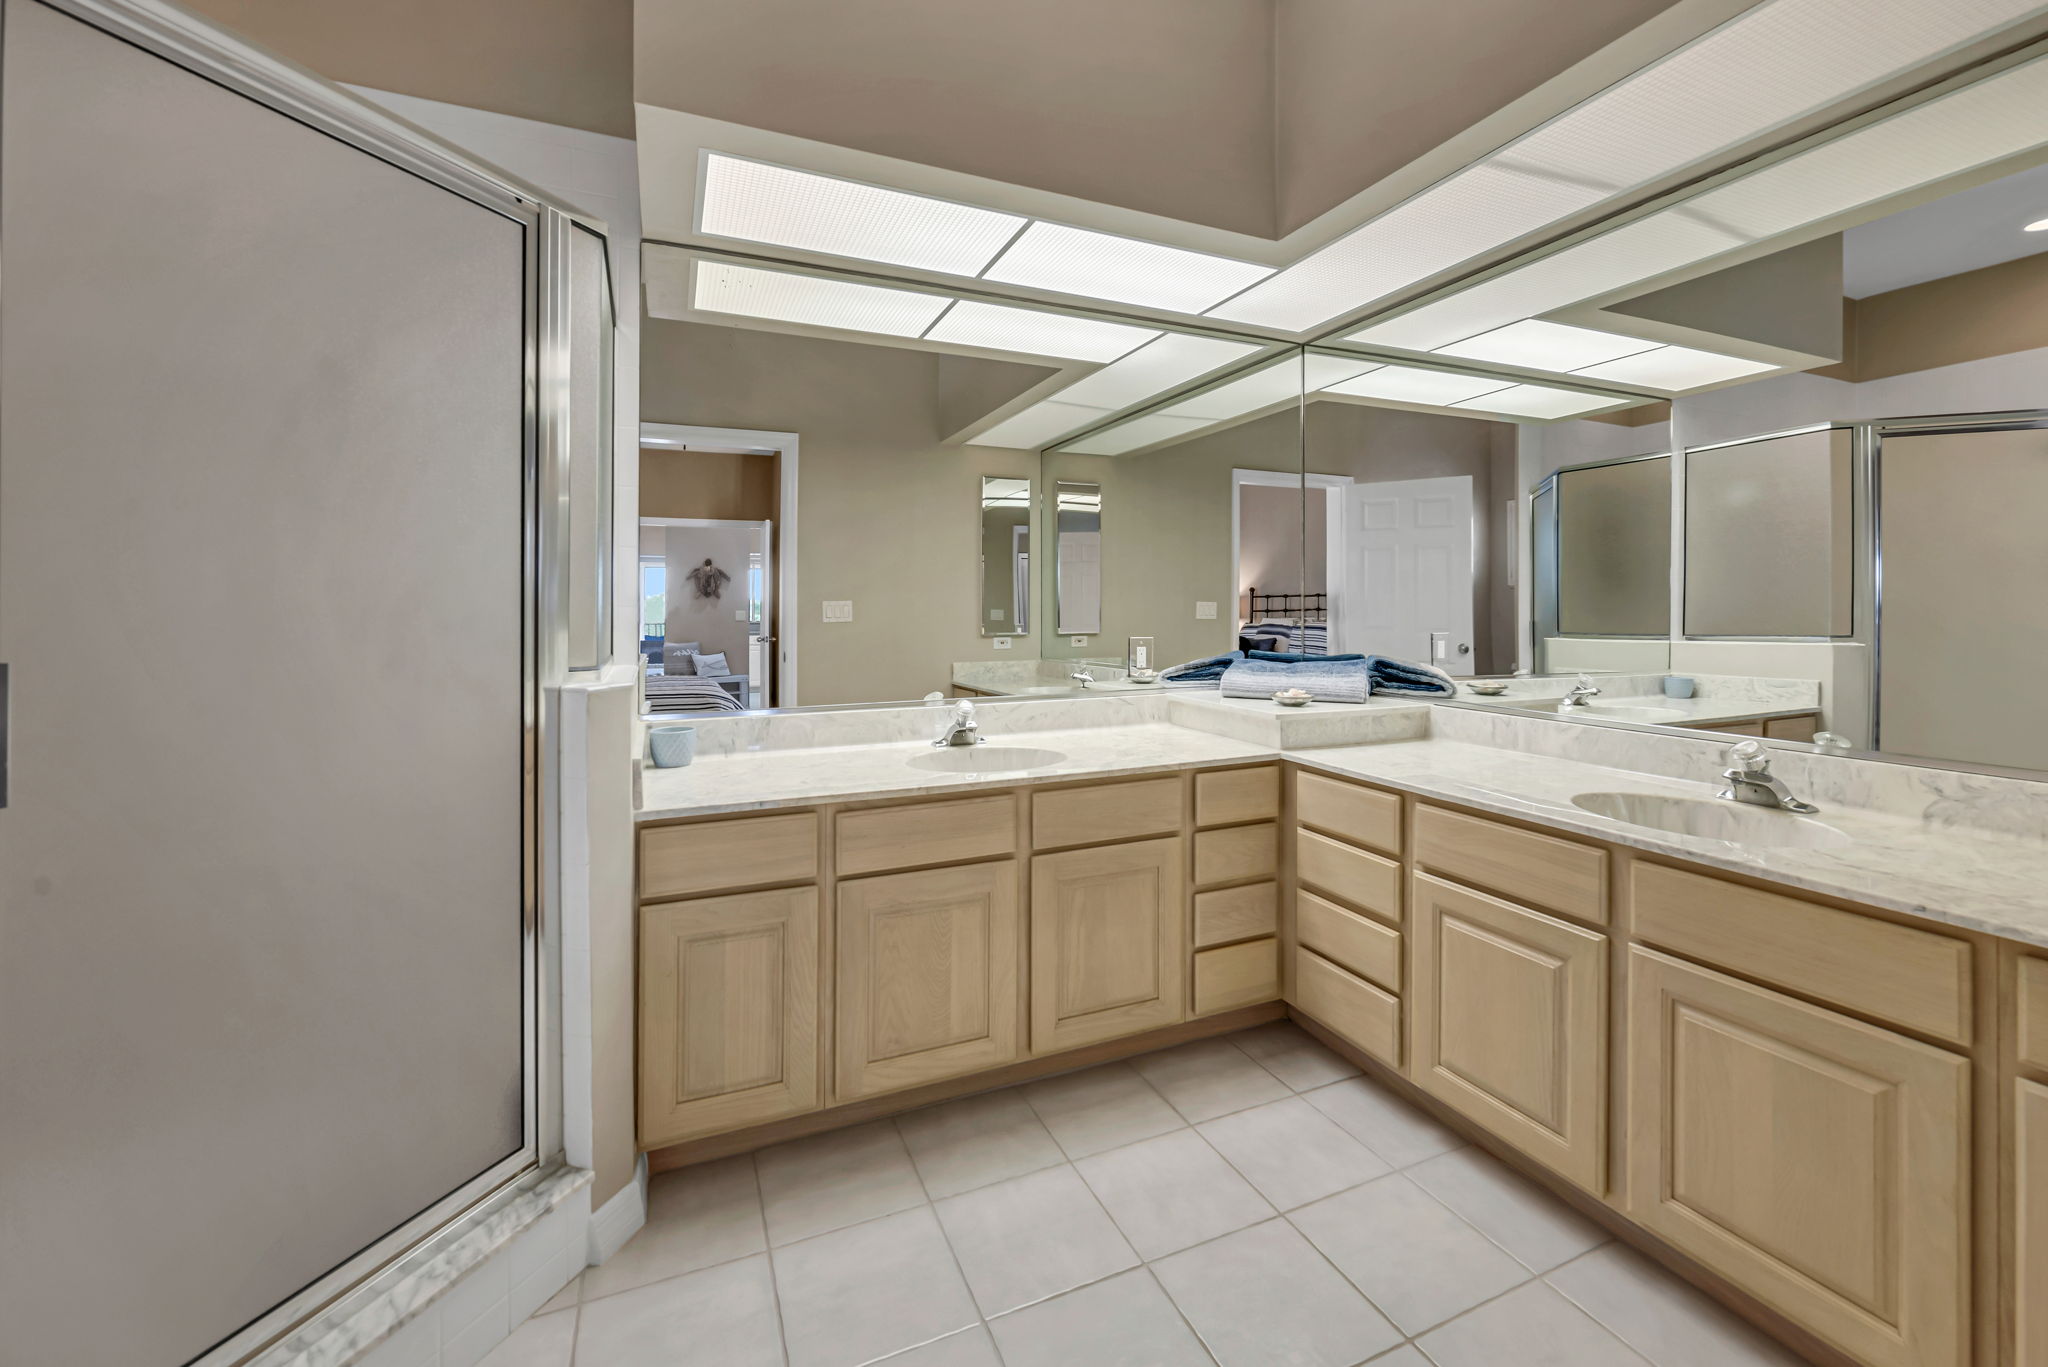 Guest Bathroom has double sinks could